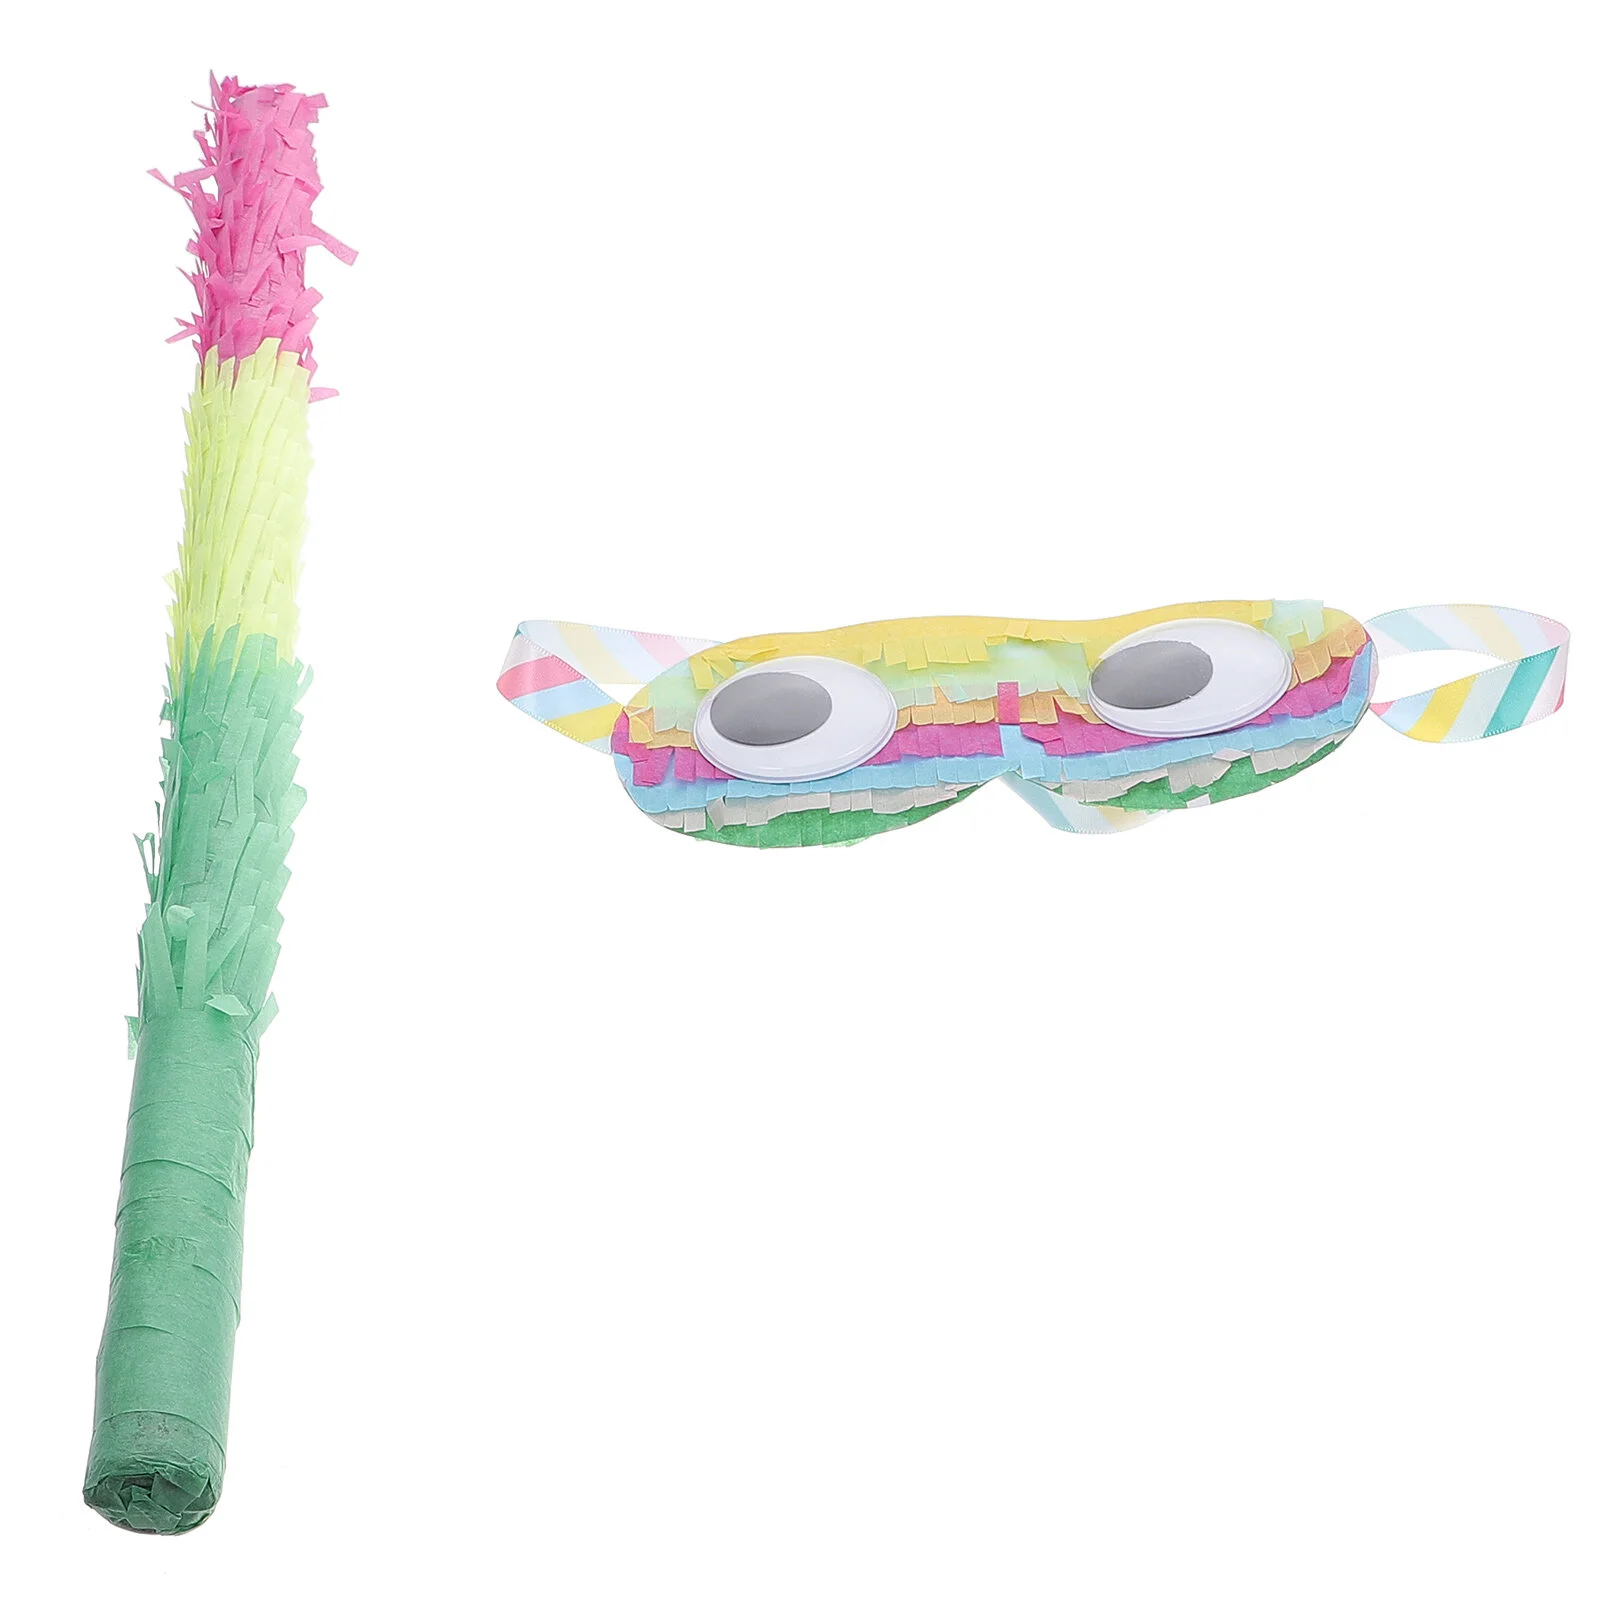 

2 Pcs Pinata Wooden Toy Party Tools Blindfold Birthday Plaything Multicolored Sticks Children's Paper Favor Funny Easy Grip